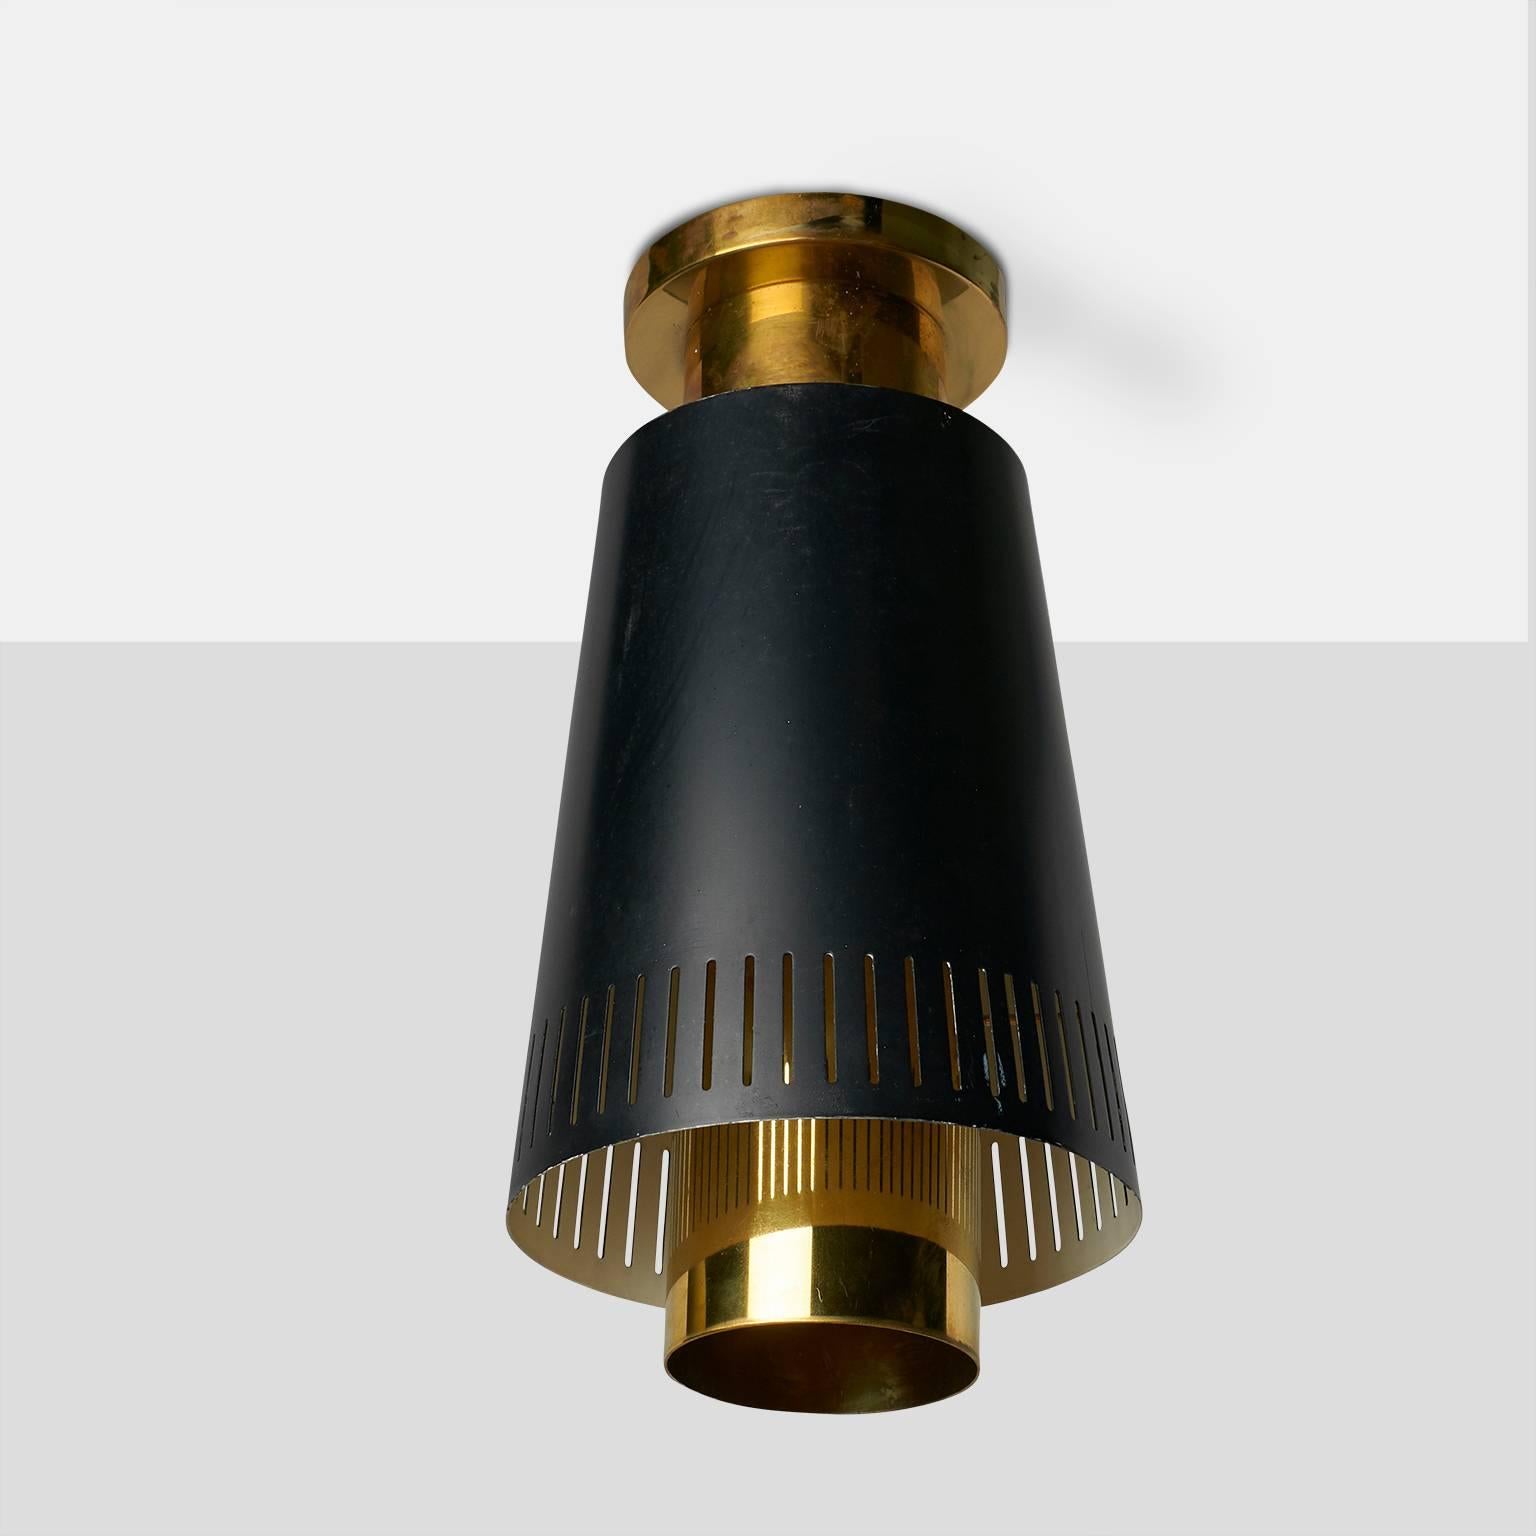 A Paavo Tynell flush mount ceiling lamp model #9067 with a black enameled shade made with perforated edge detail for Taito Oy,
Finland, circa 1950s.